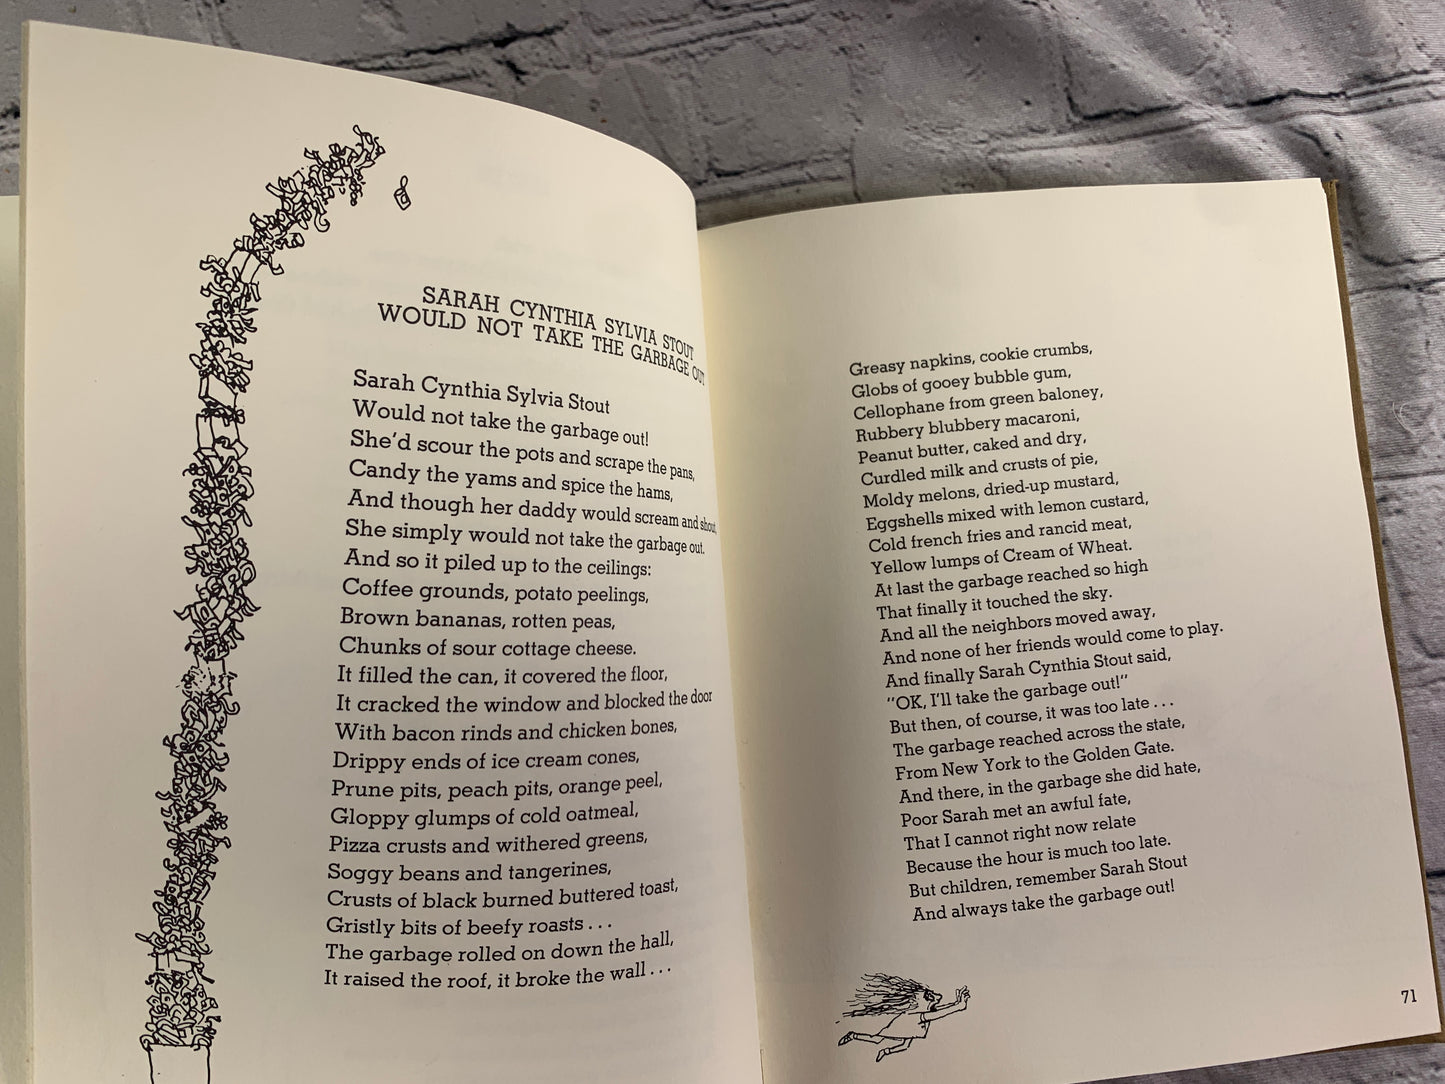 Where The Sidewalk Ends Poems and Drawings of Shel Silverstein [1974]